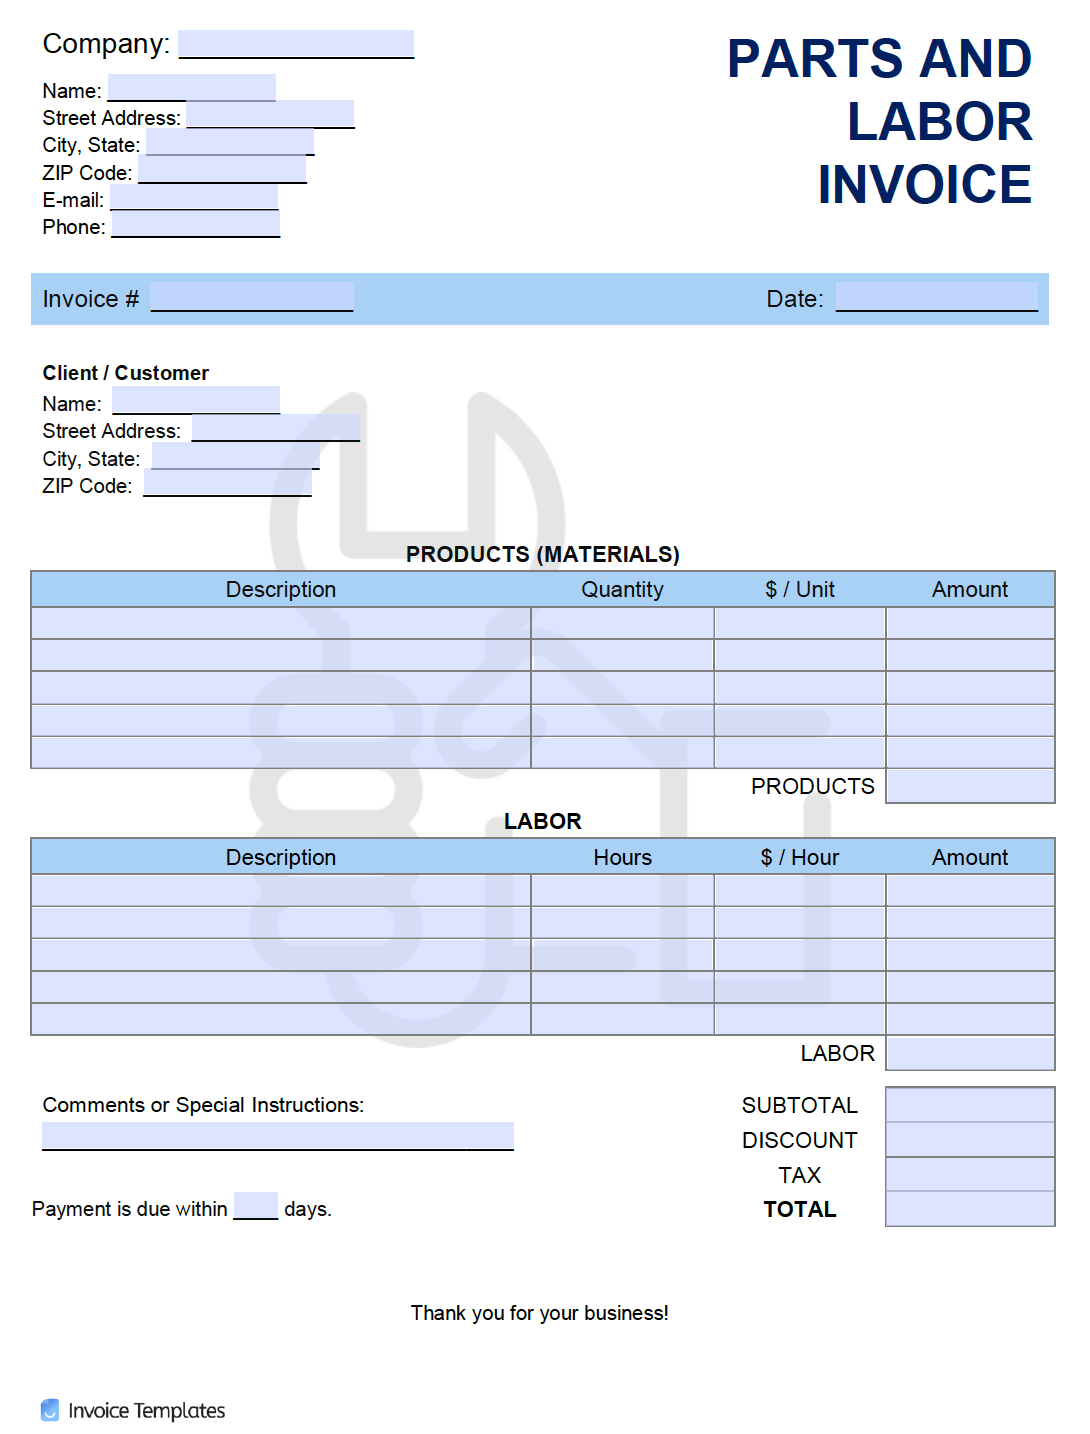 Free Parts And Labor Invoice Template Pdf Word Excel